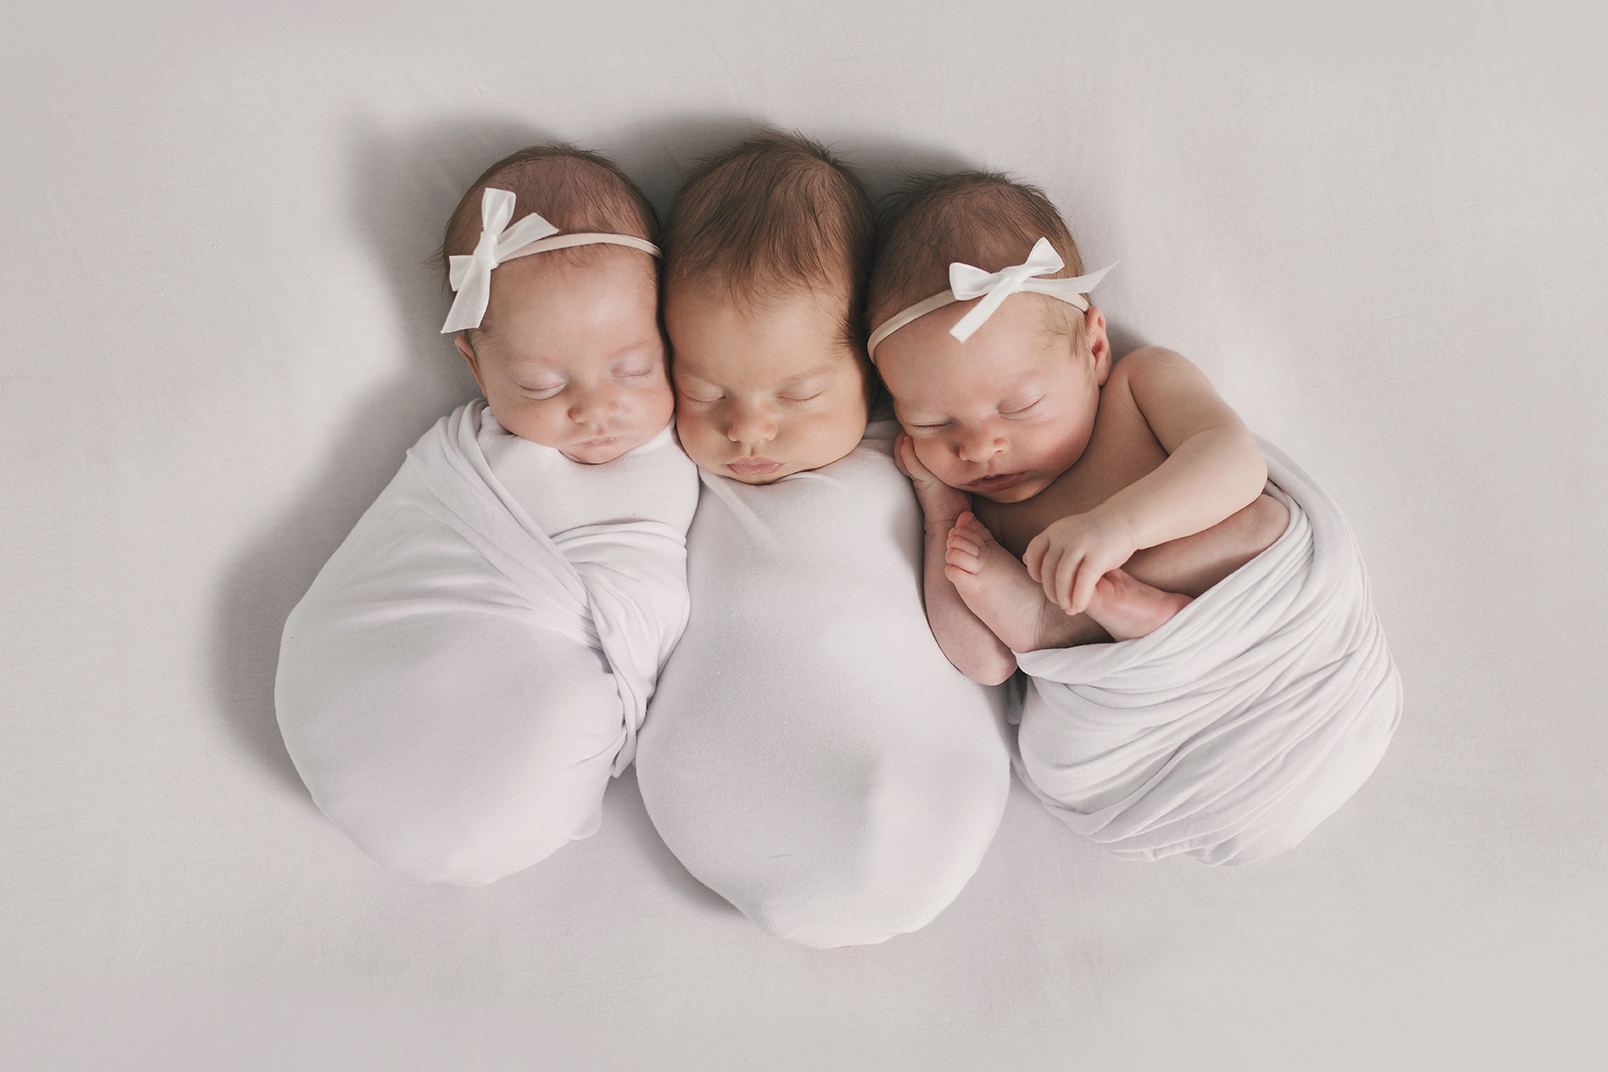 Multiples newborn session of triplet newborns by warren and youngstown ohio newborn photogrpaher christie leigh photo.jpg